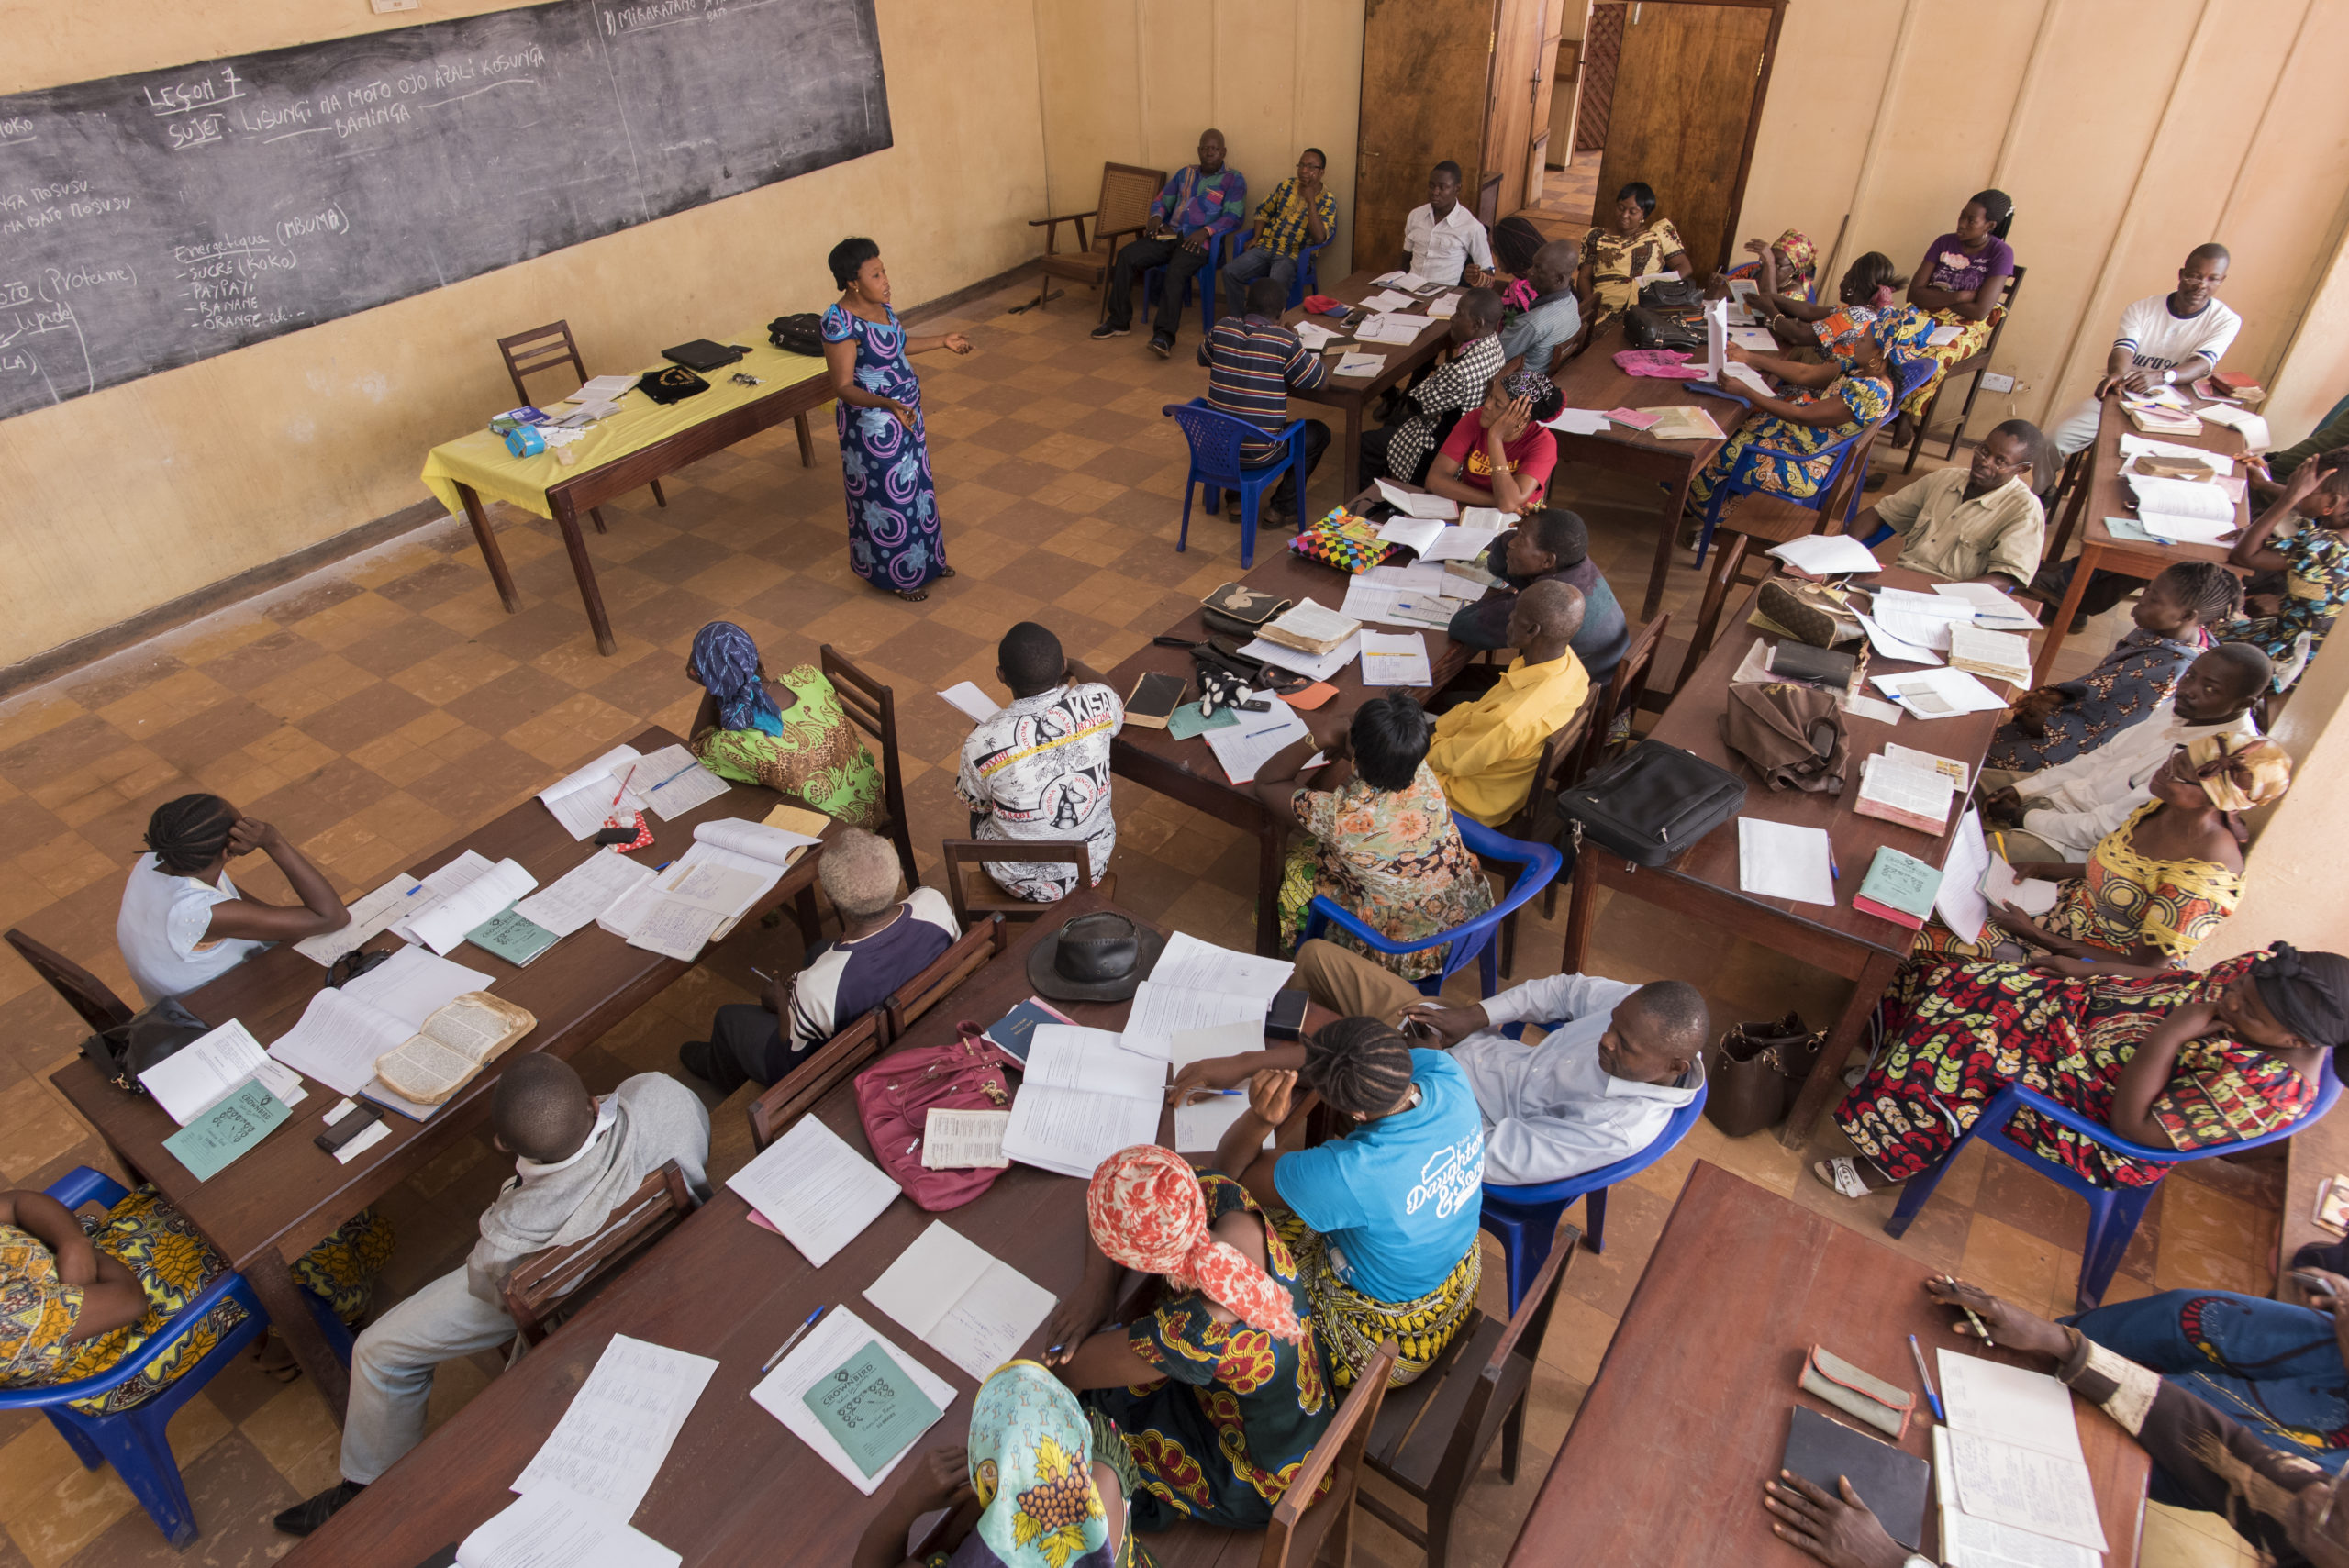 An aerial view of a classroom where people are studying together. A woman speaks at the front.